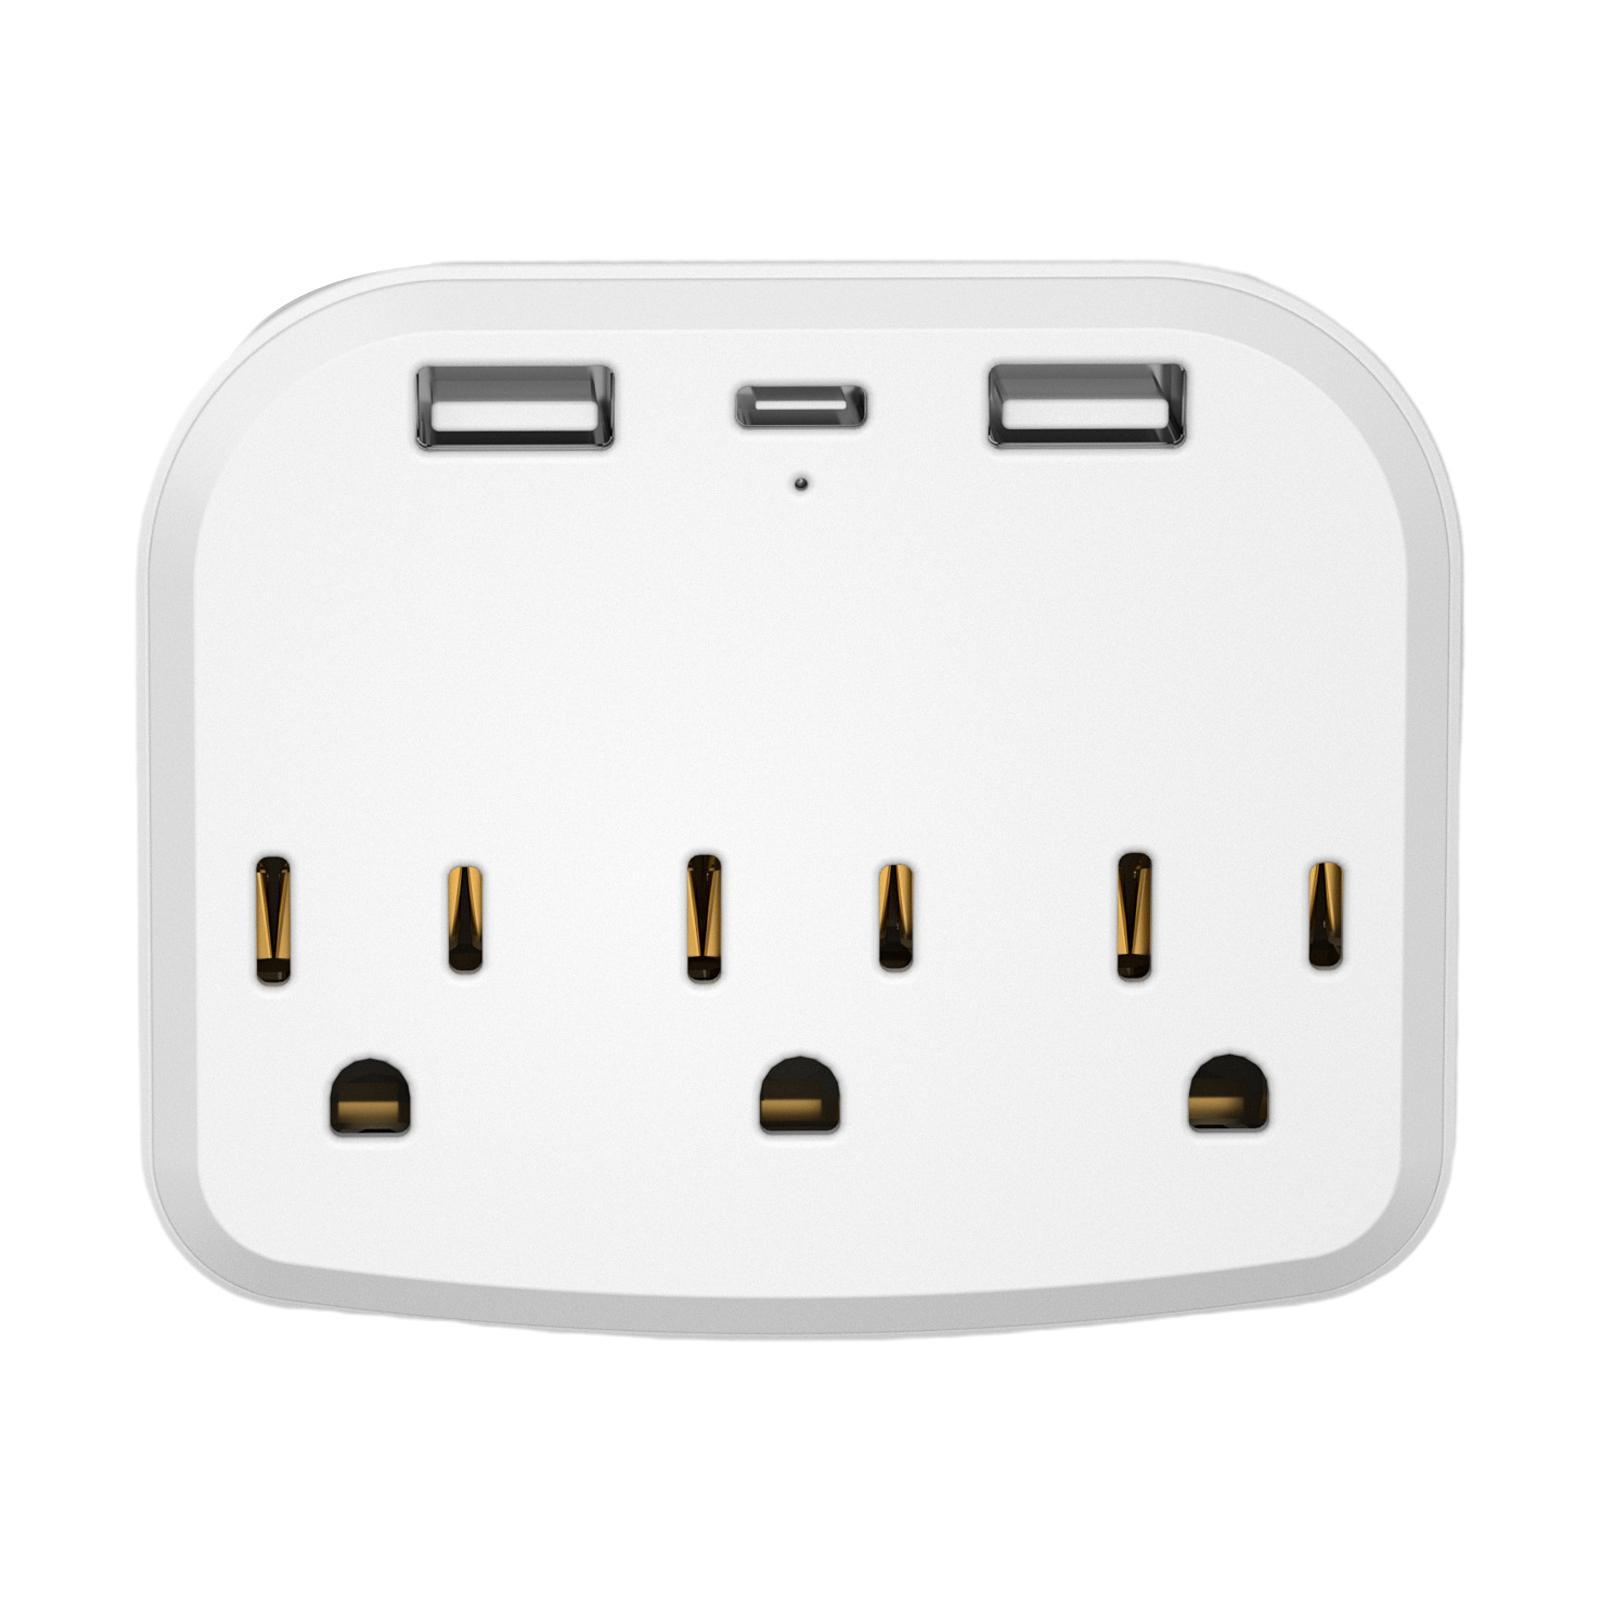 Electrical Outlet Wall Plug Multiple Ports Adapter 15A for Bedroom Desk Home